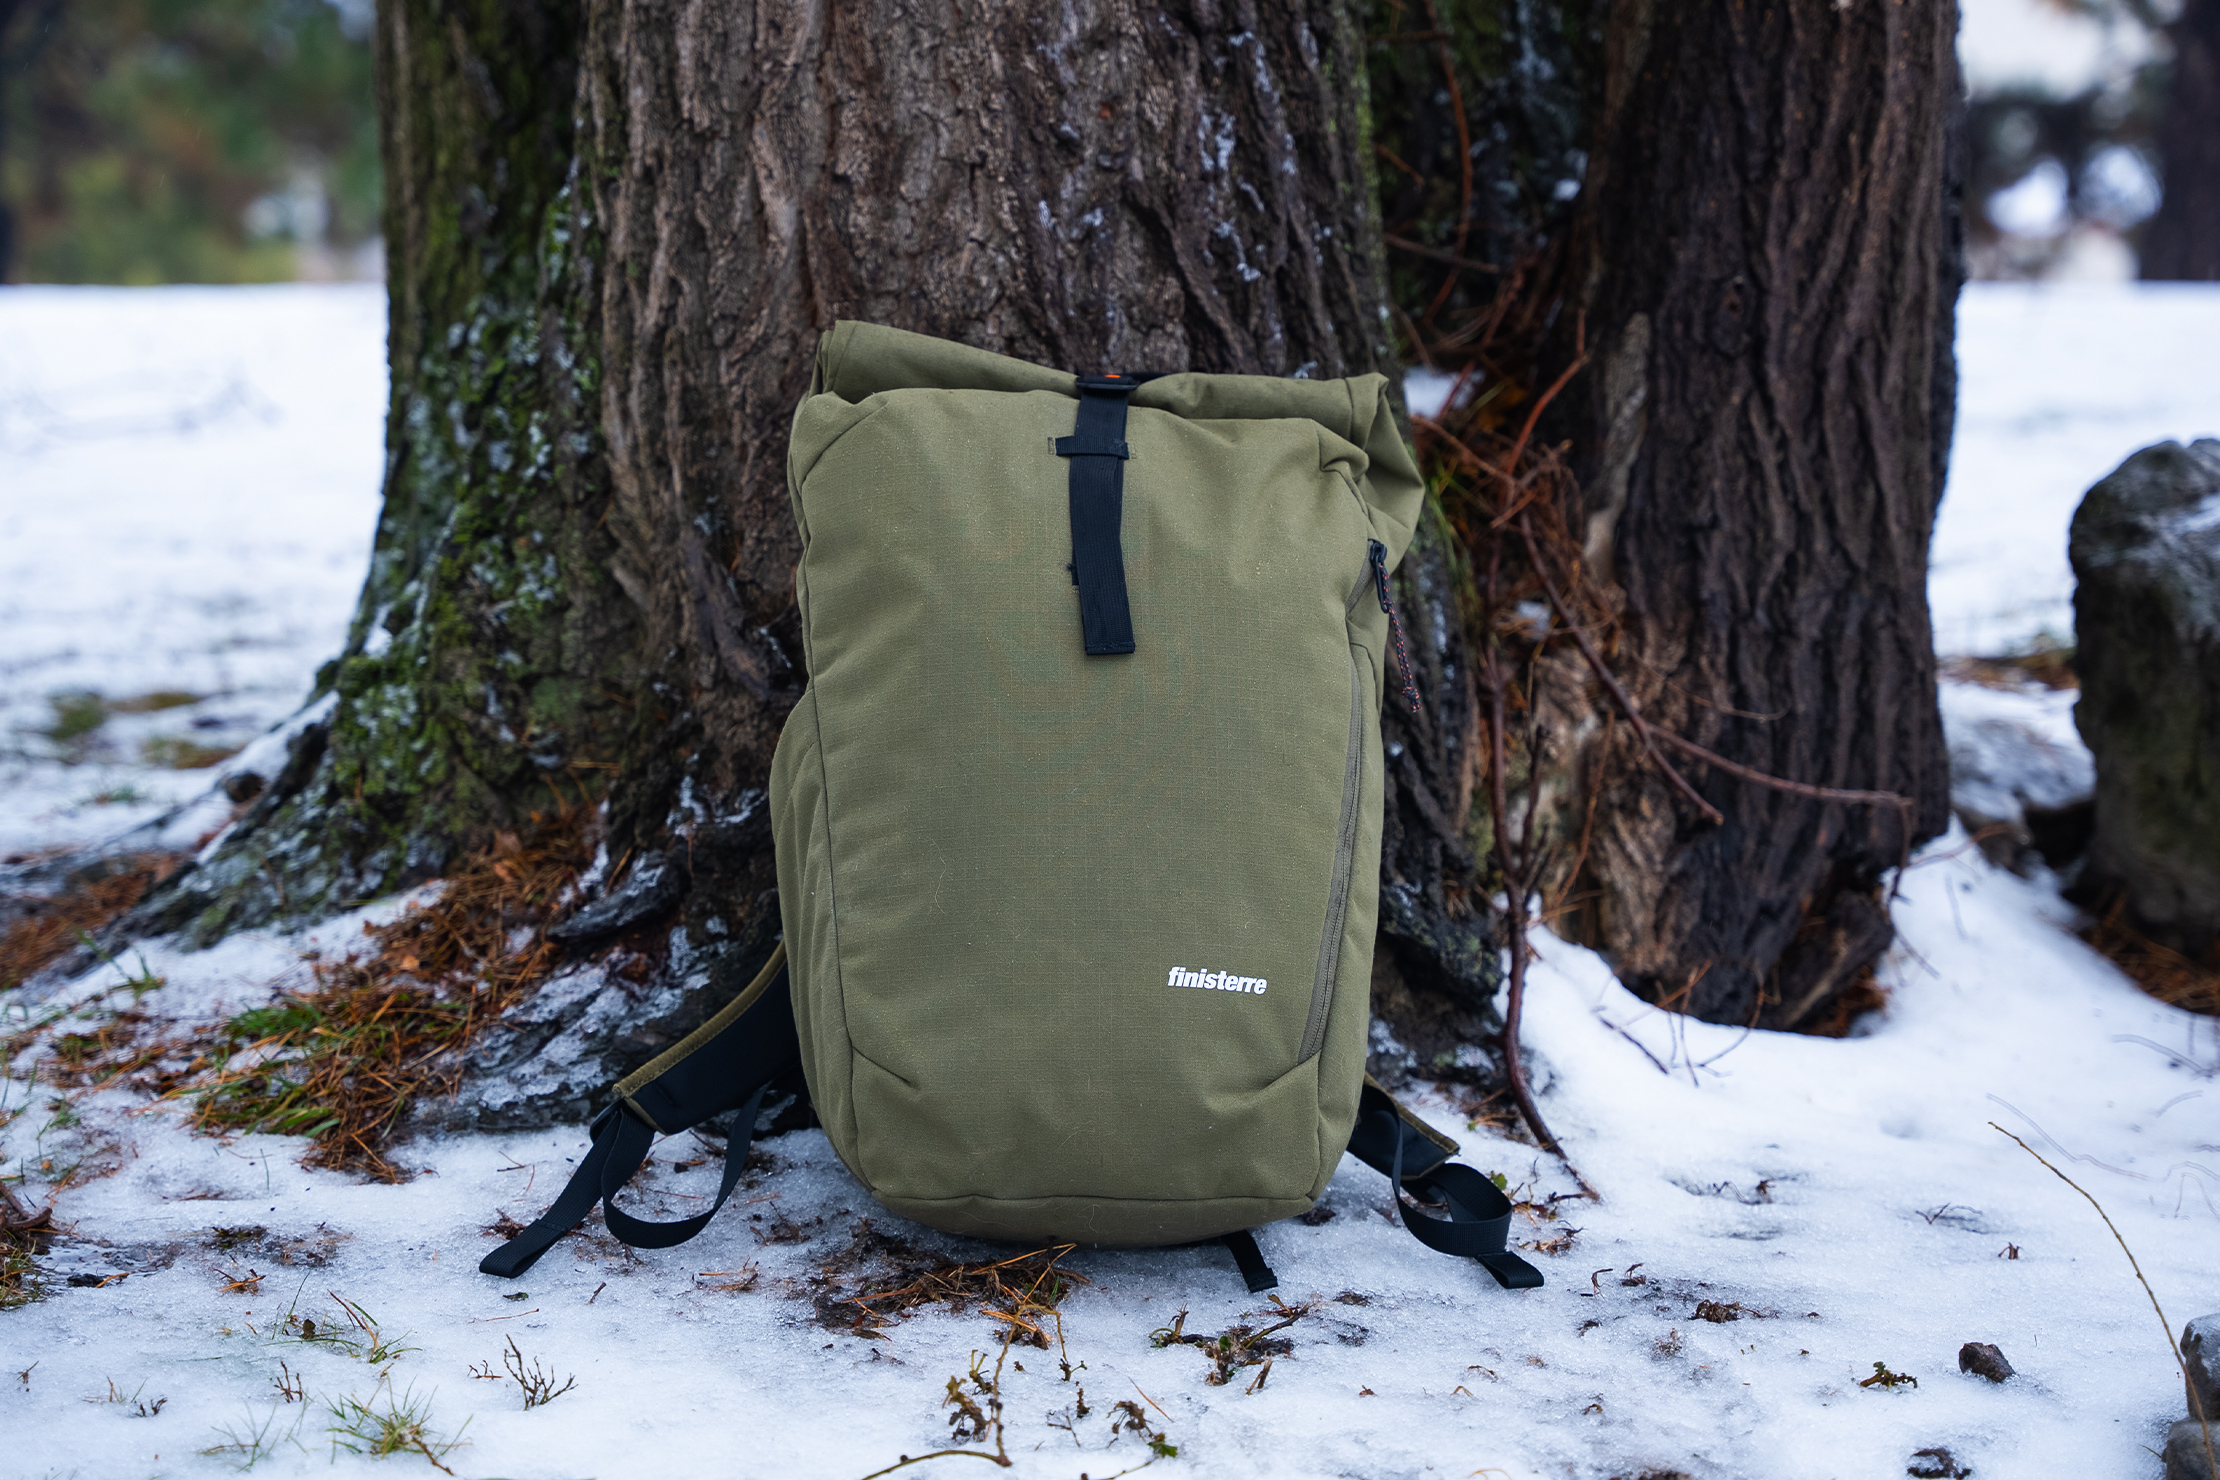 Finisterre Nautilus 23L Backpack Review | Pack Hacker